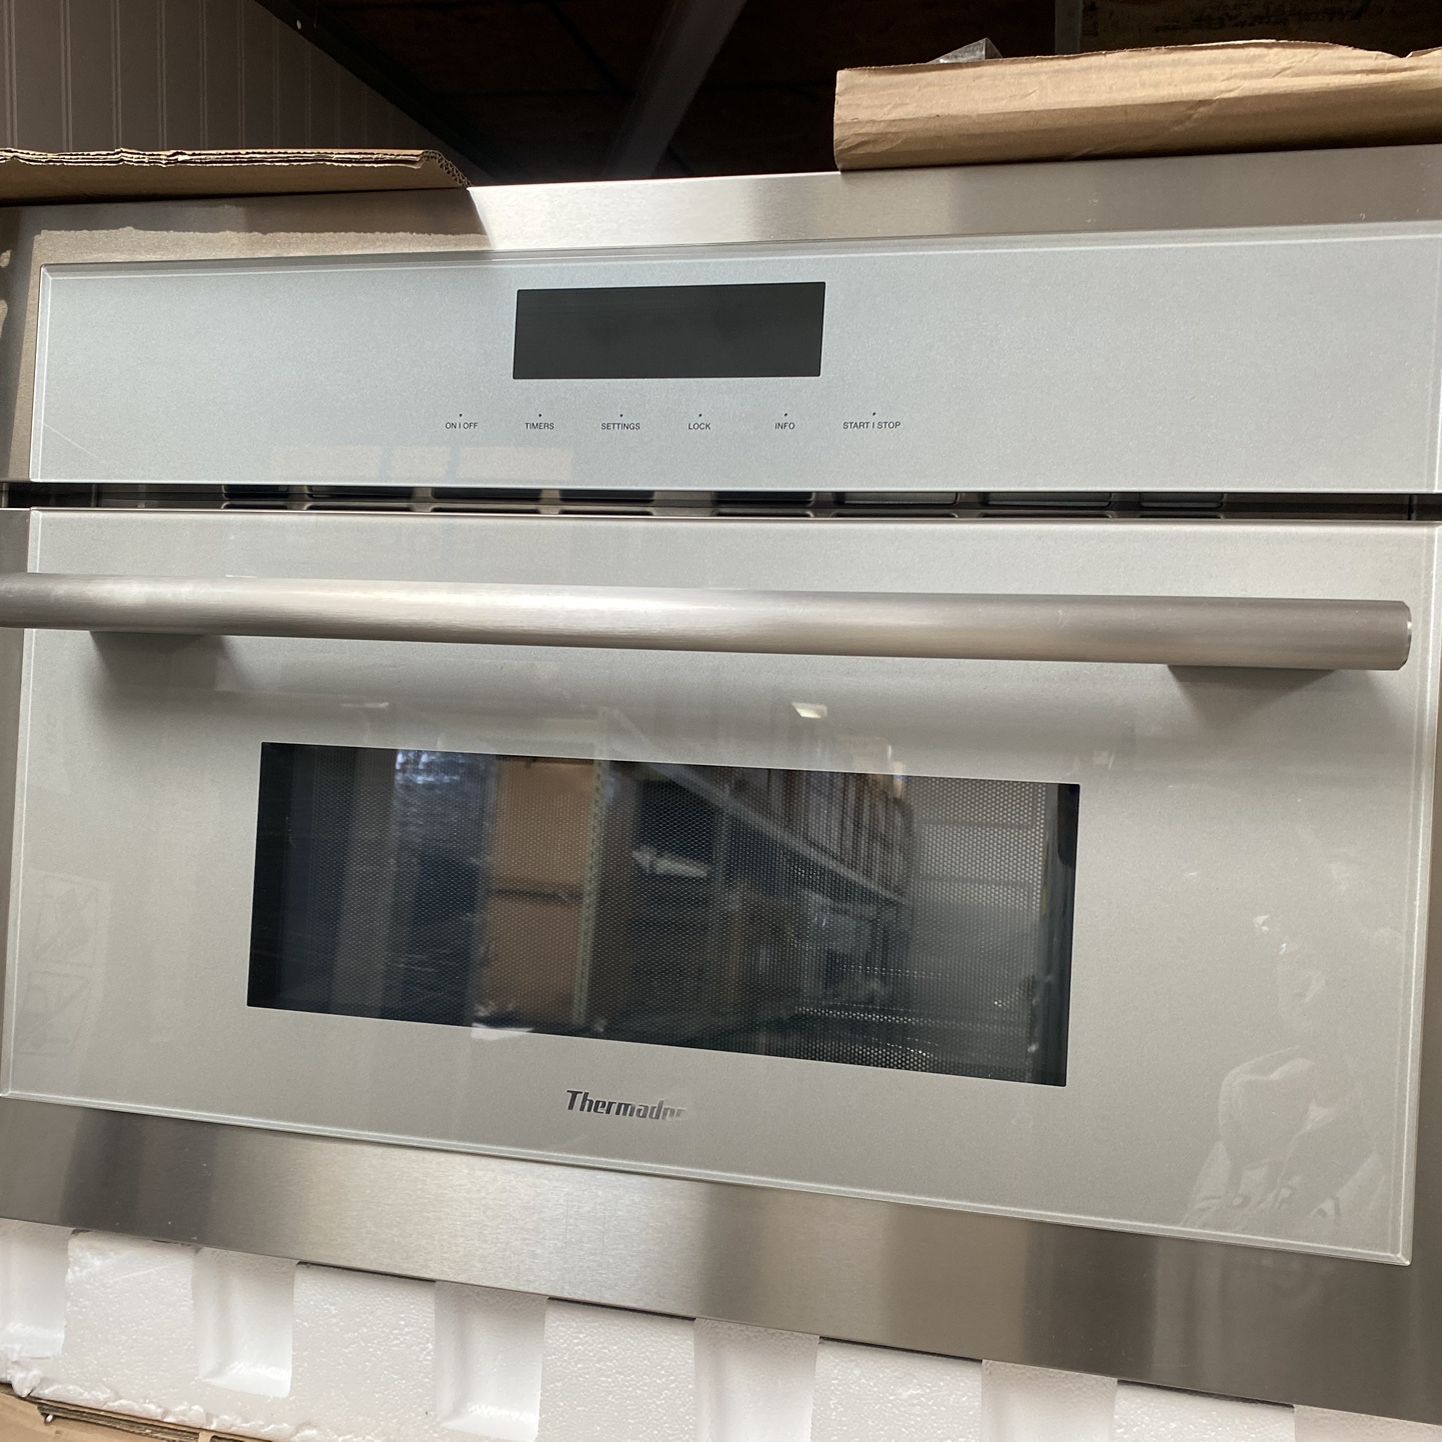 New 30” Thermador Built in Microwave 